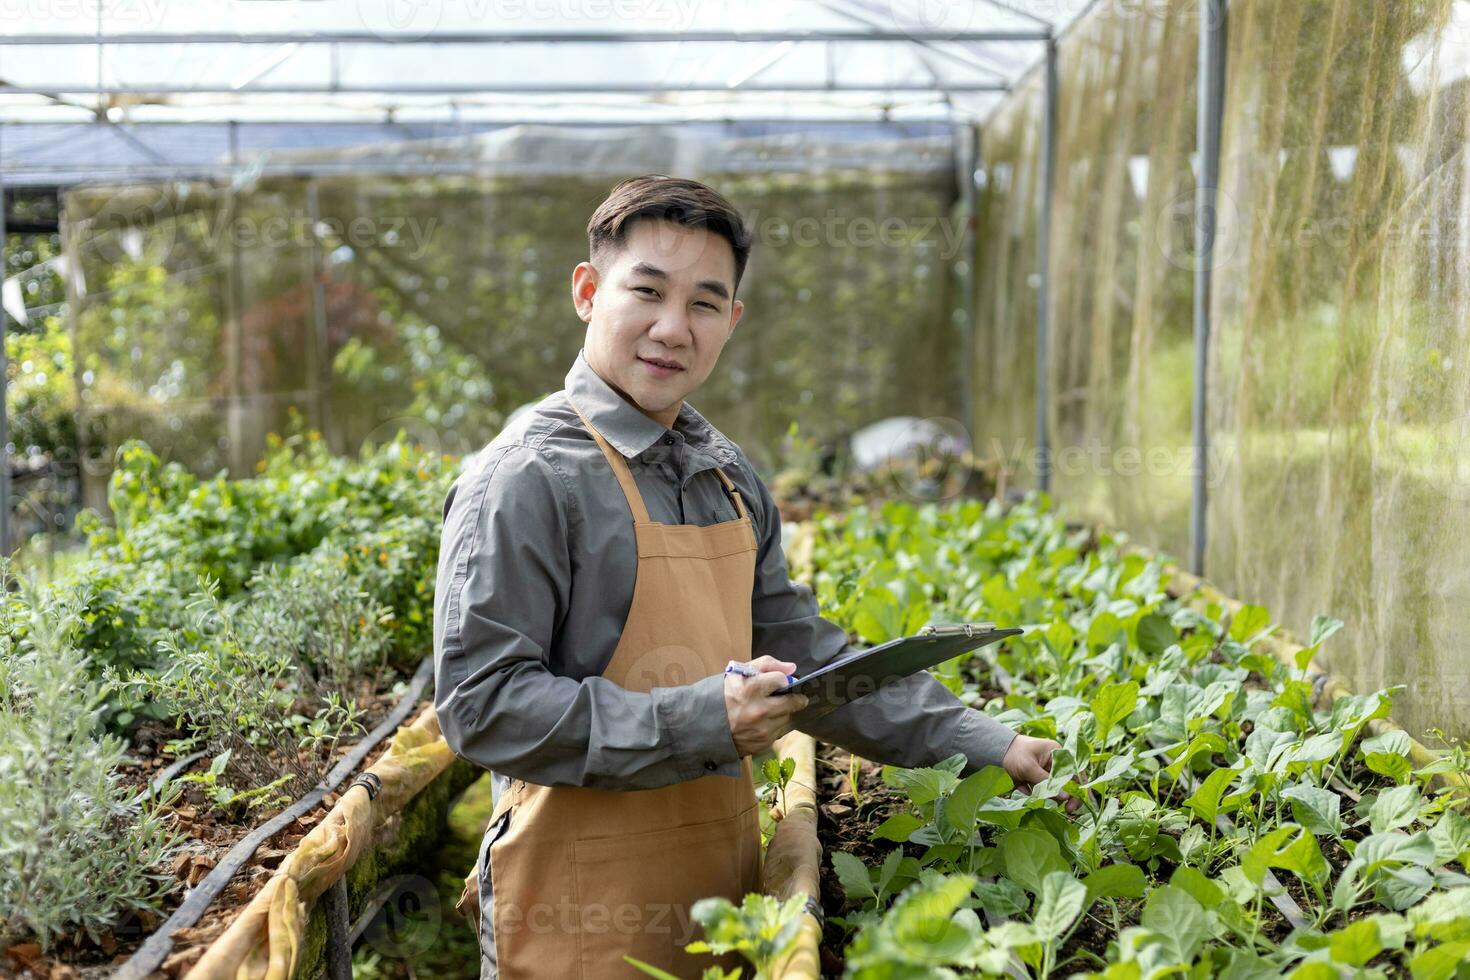 Asian local farmer growing salad lettuce and checking the growth rate inside the greenhouse using organics soil approach for family own business and picking some for sale photo